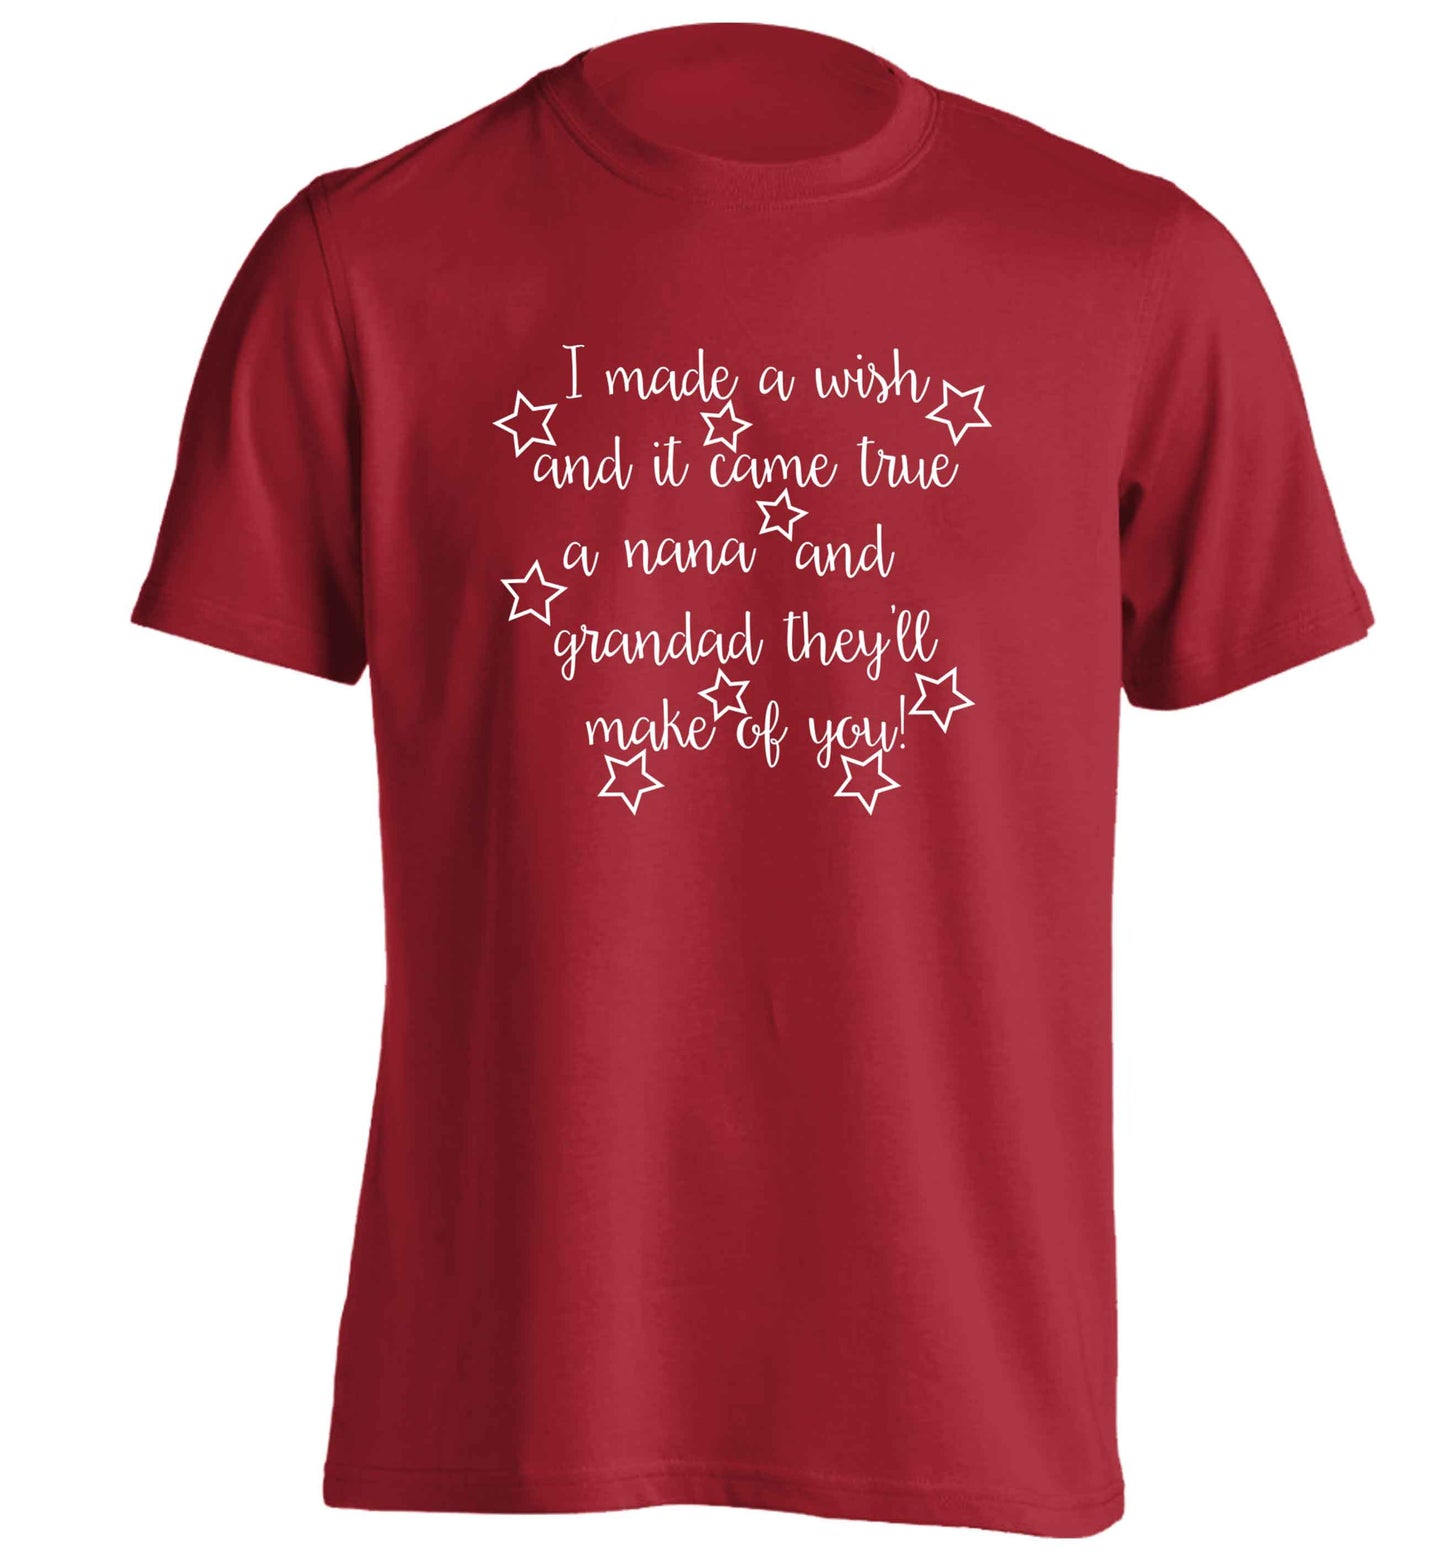 I made a wish and it came true a nana and grandad they'll make of you! adults unisex red Tshirt 2XL